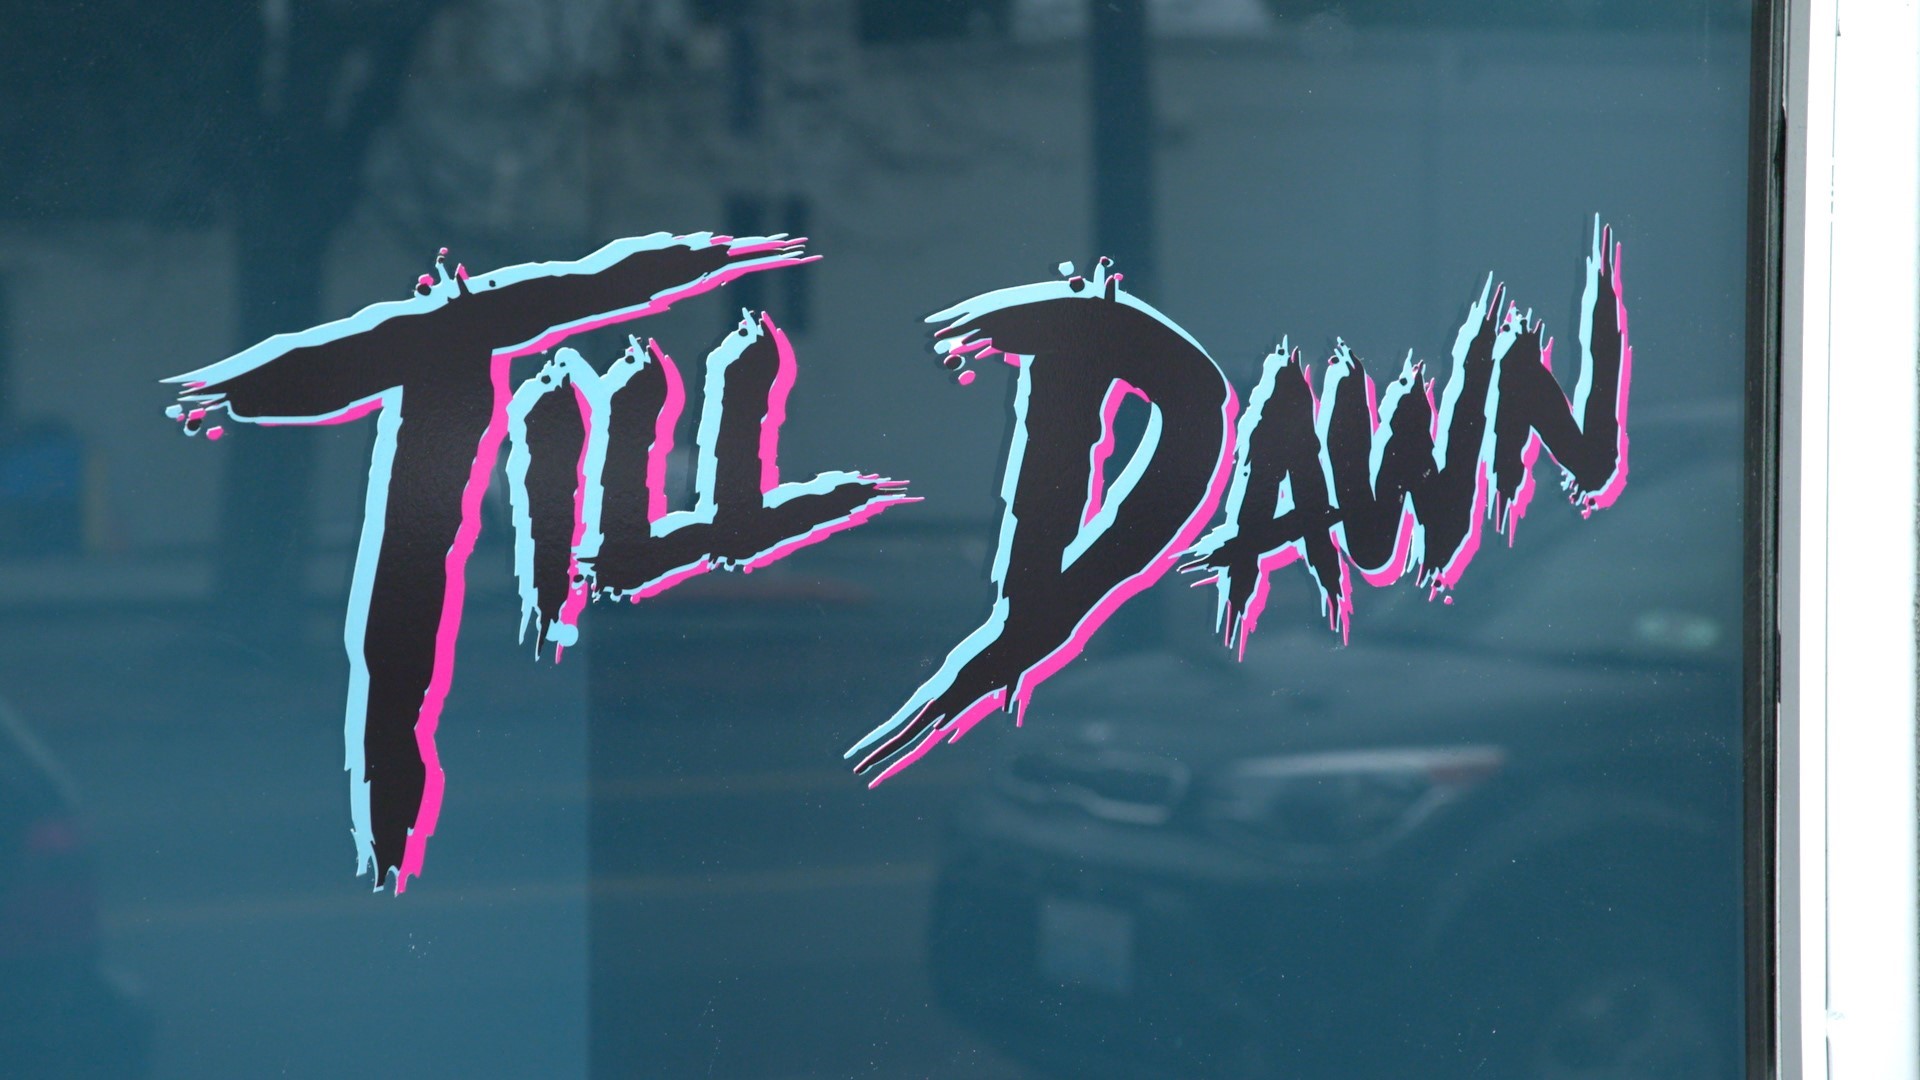 Till Dawn is a unique spot that features great coffee, beer, specialty Asian pastries, and more. #k5evening